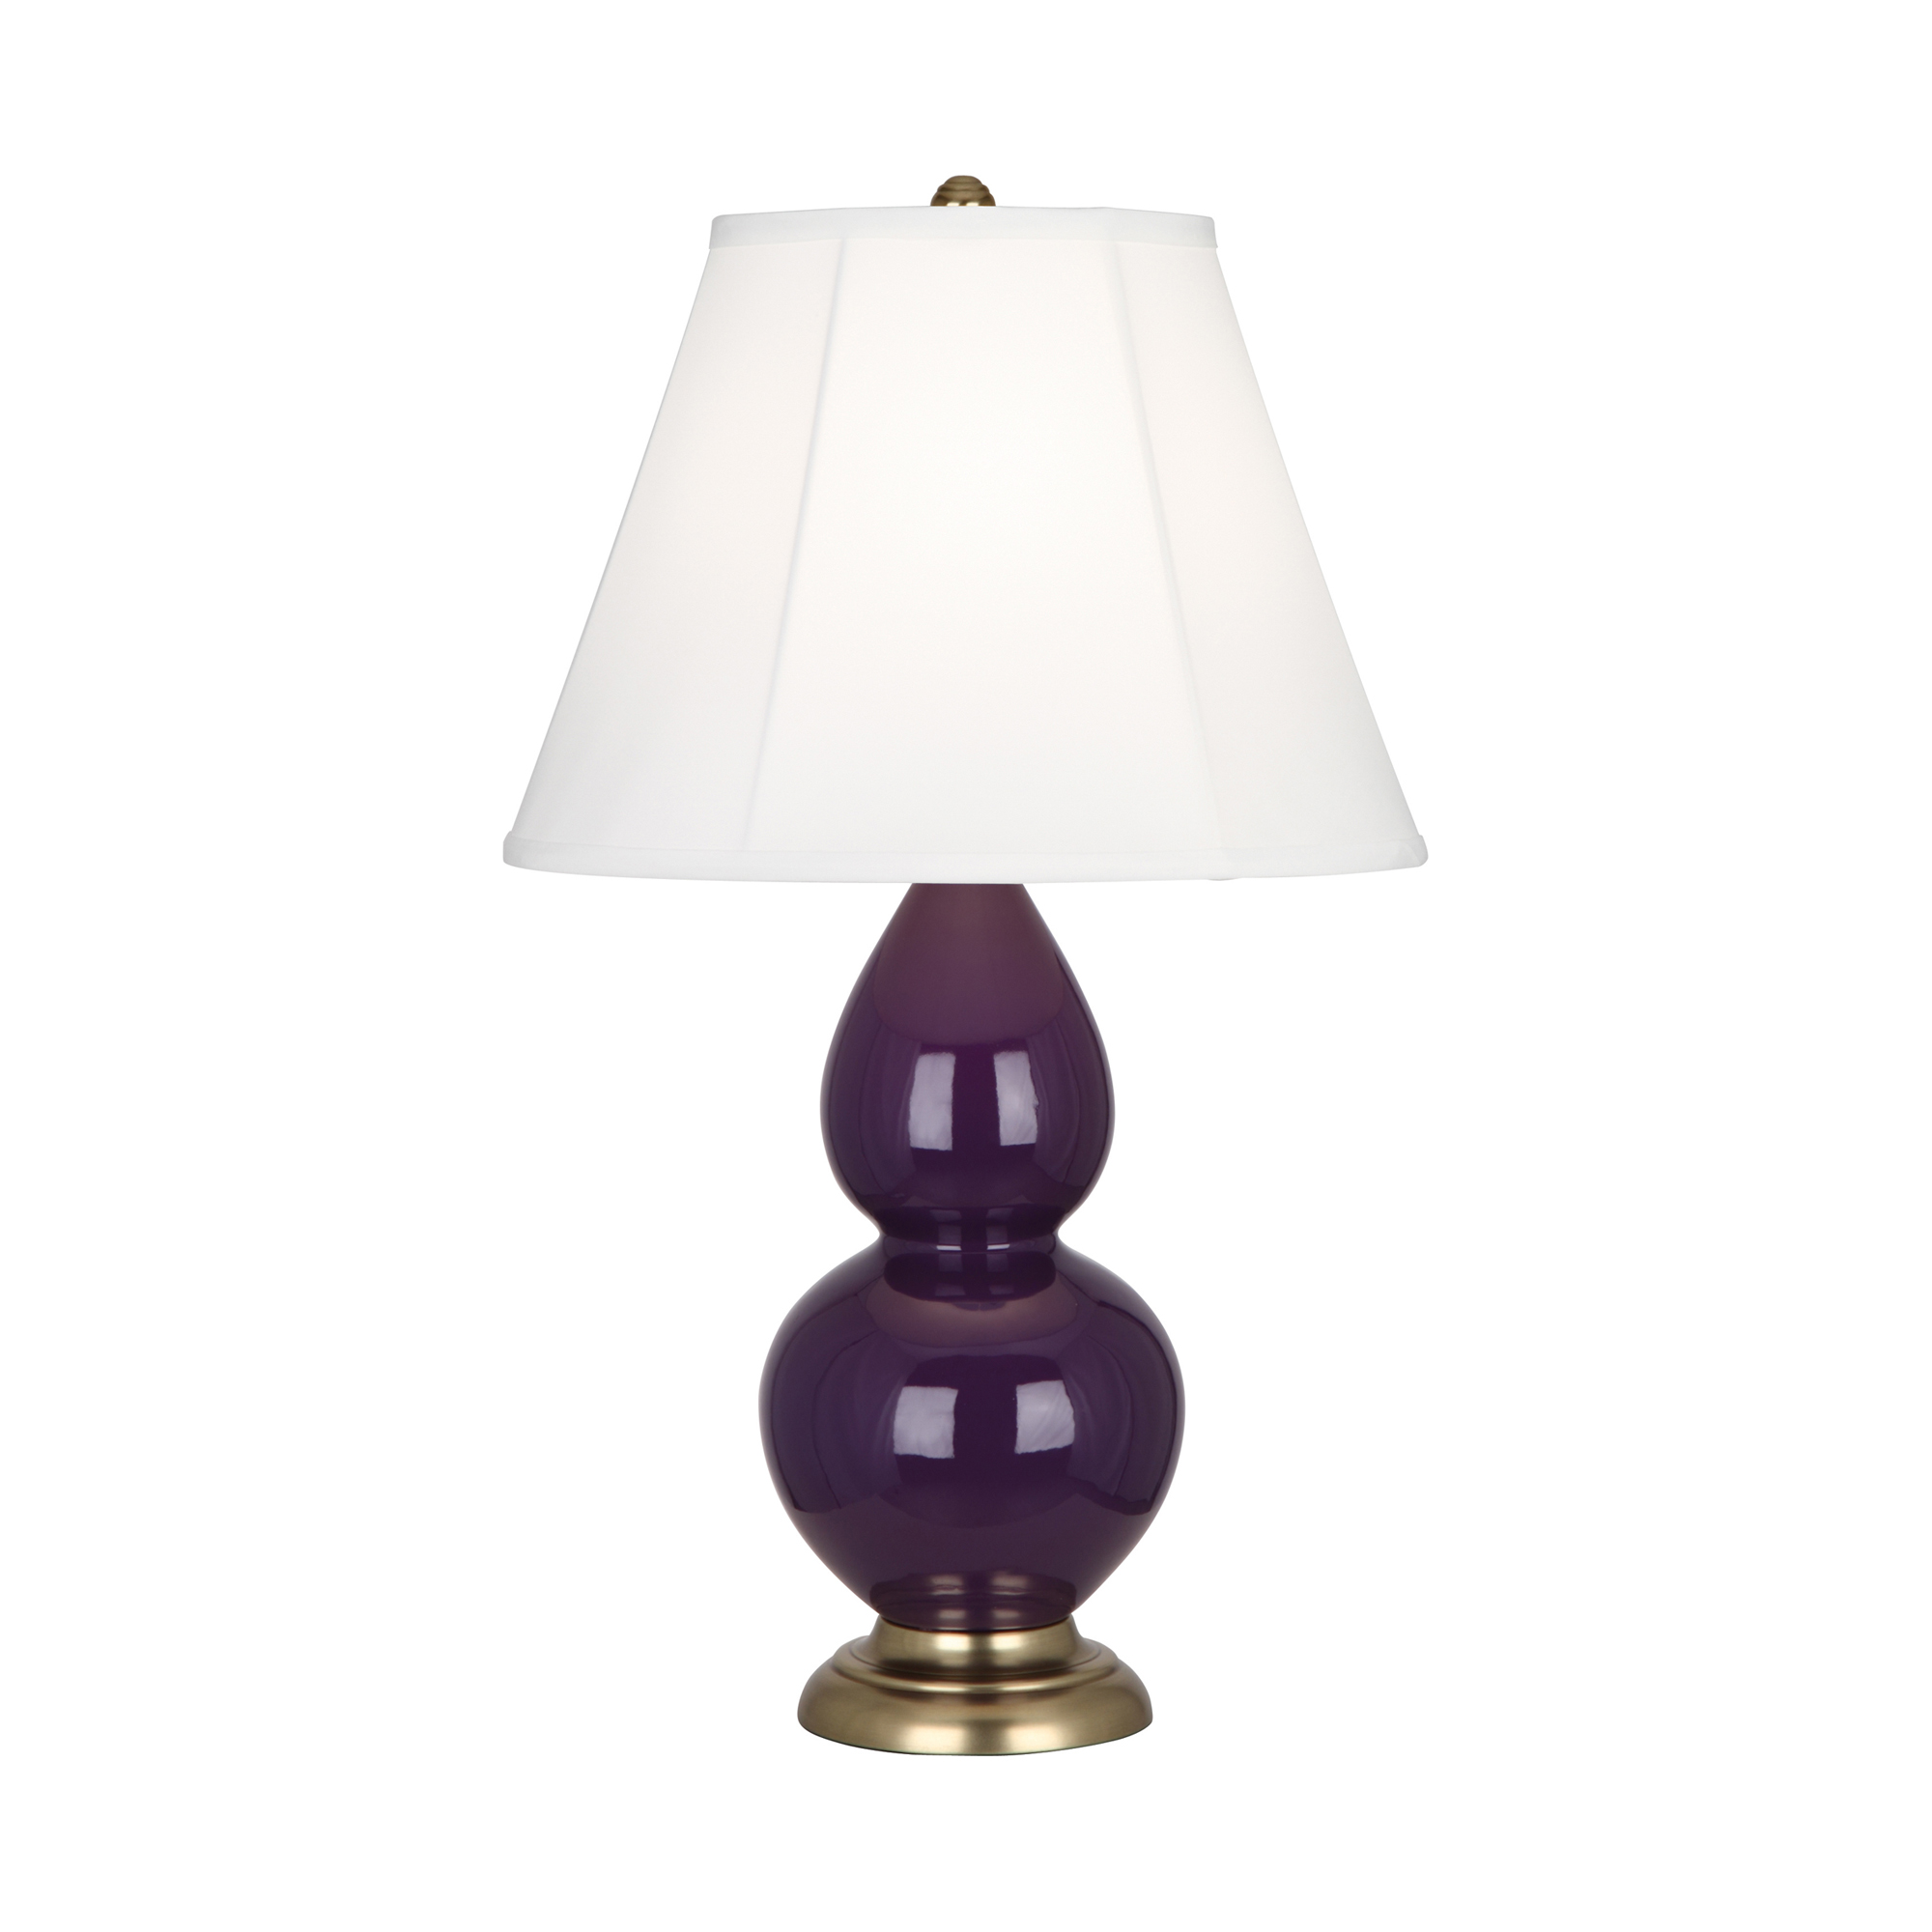 Small Double Gourd Accent Lamp Style #1765